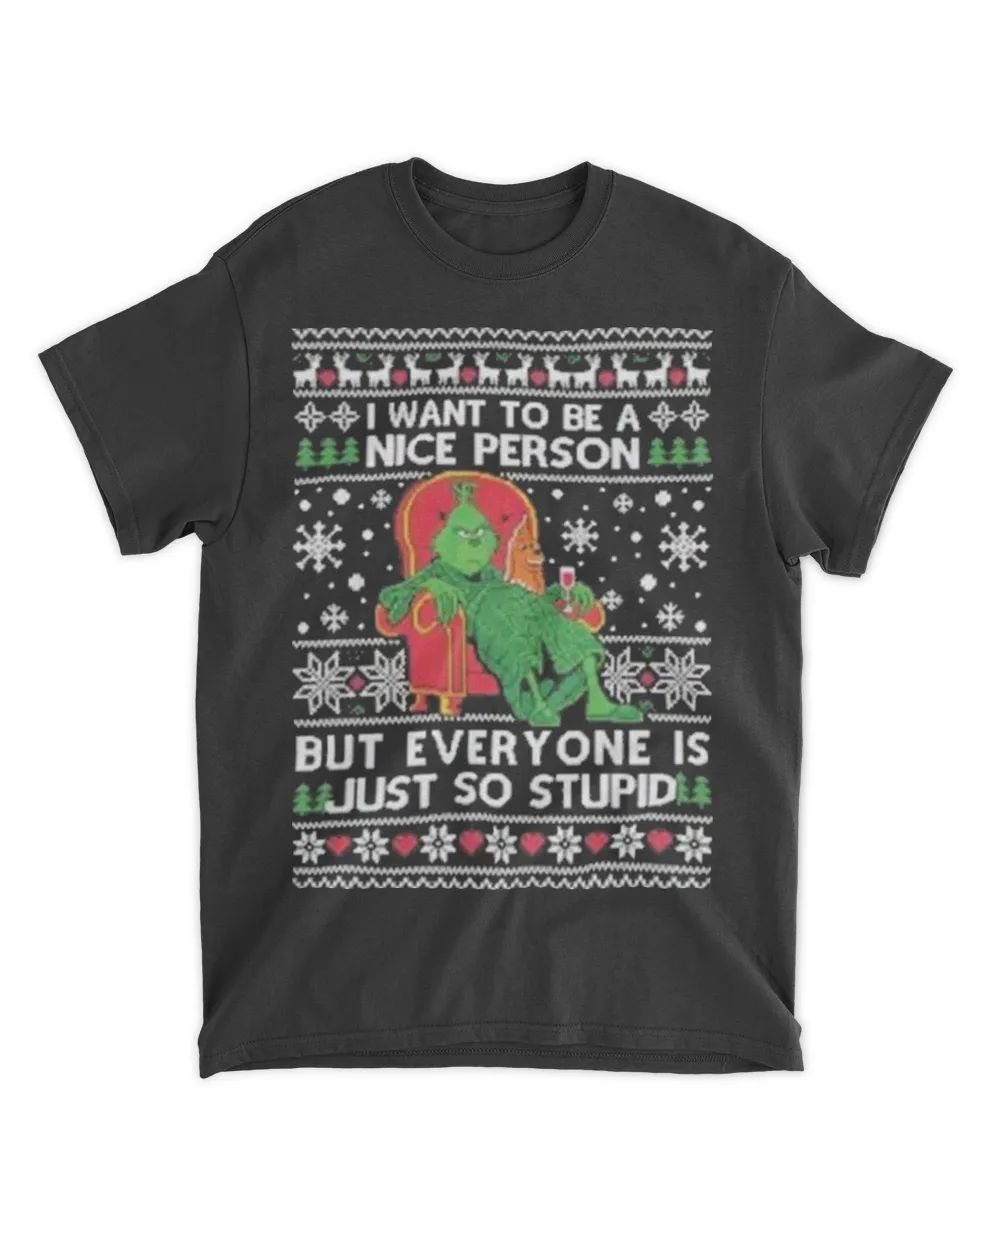 Grinch I want to be a nice person but never everyone is just so stupid Ugly Christmas sweater